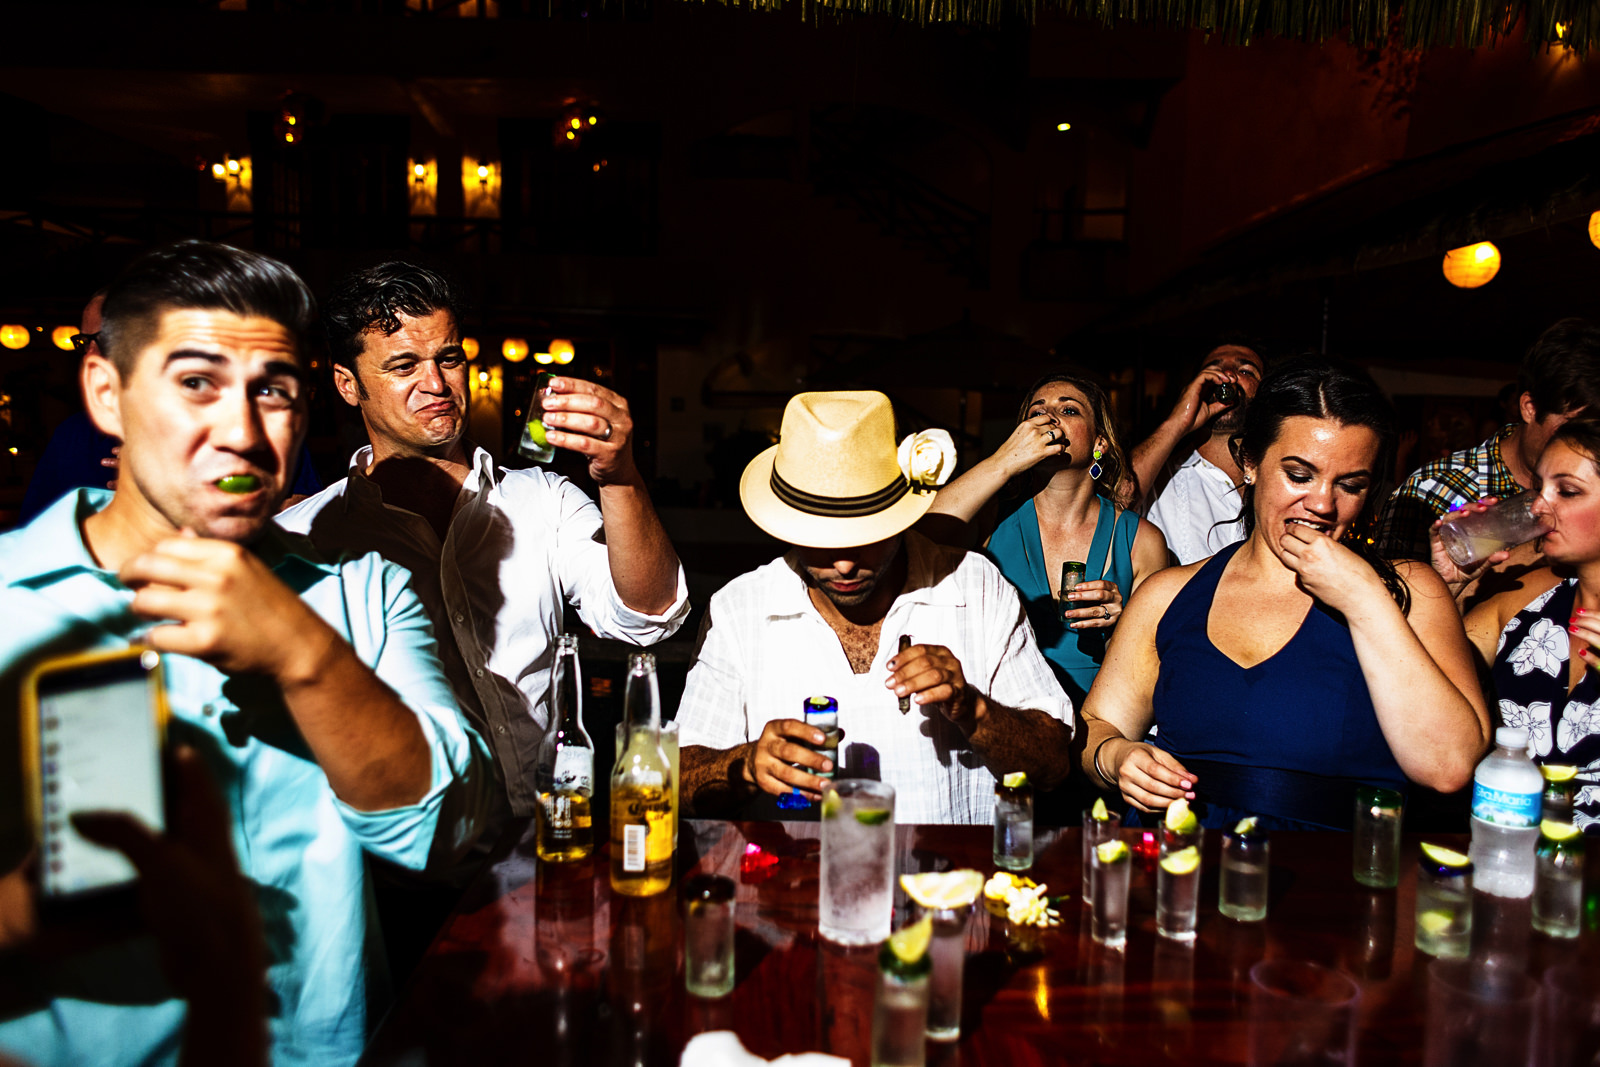 Several wedding guests having a tequila shot at the bar with the groom